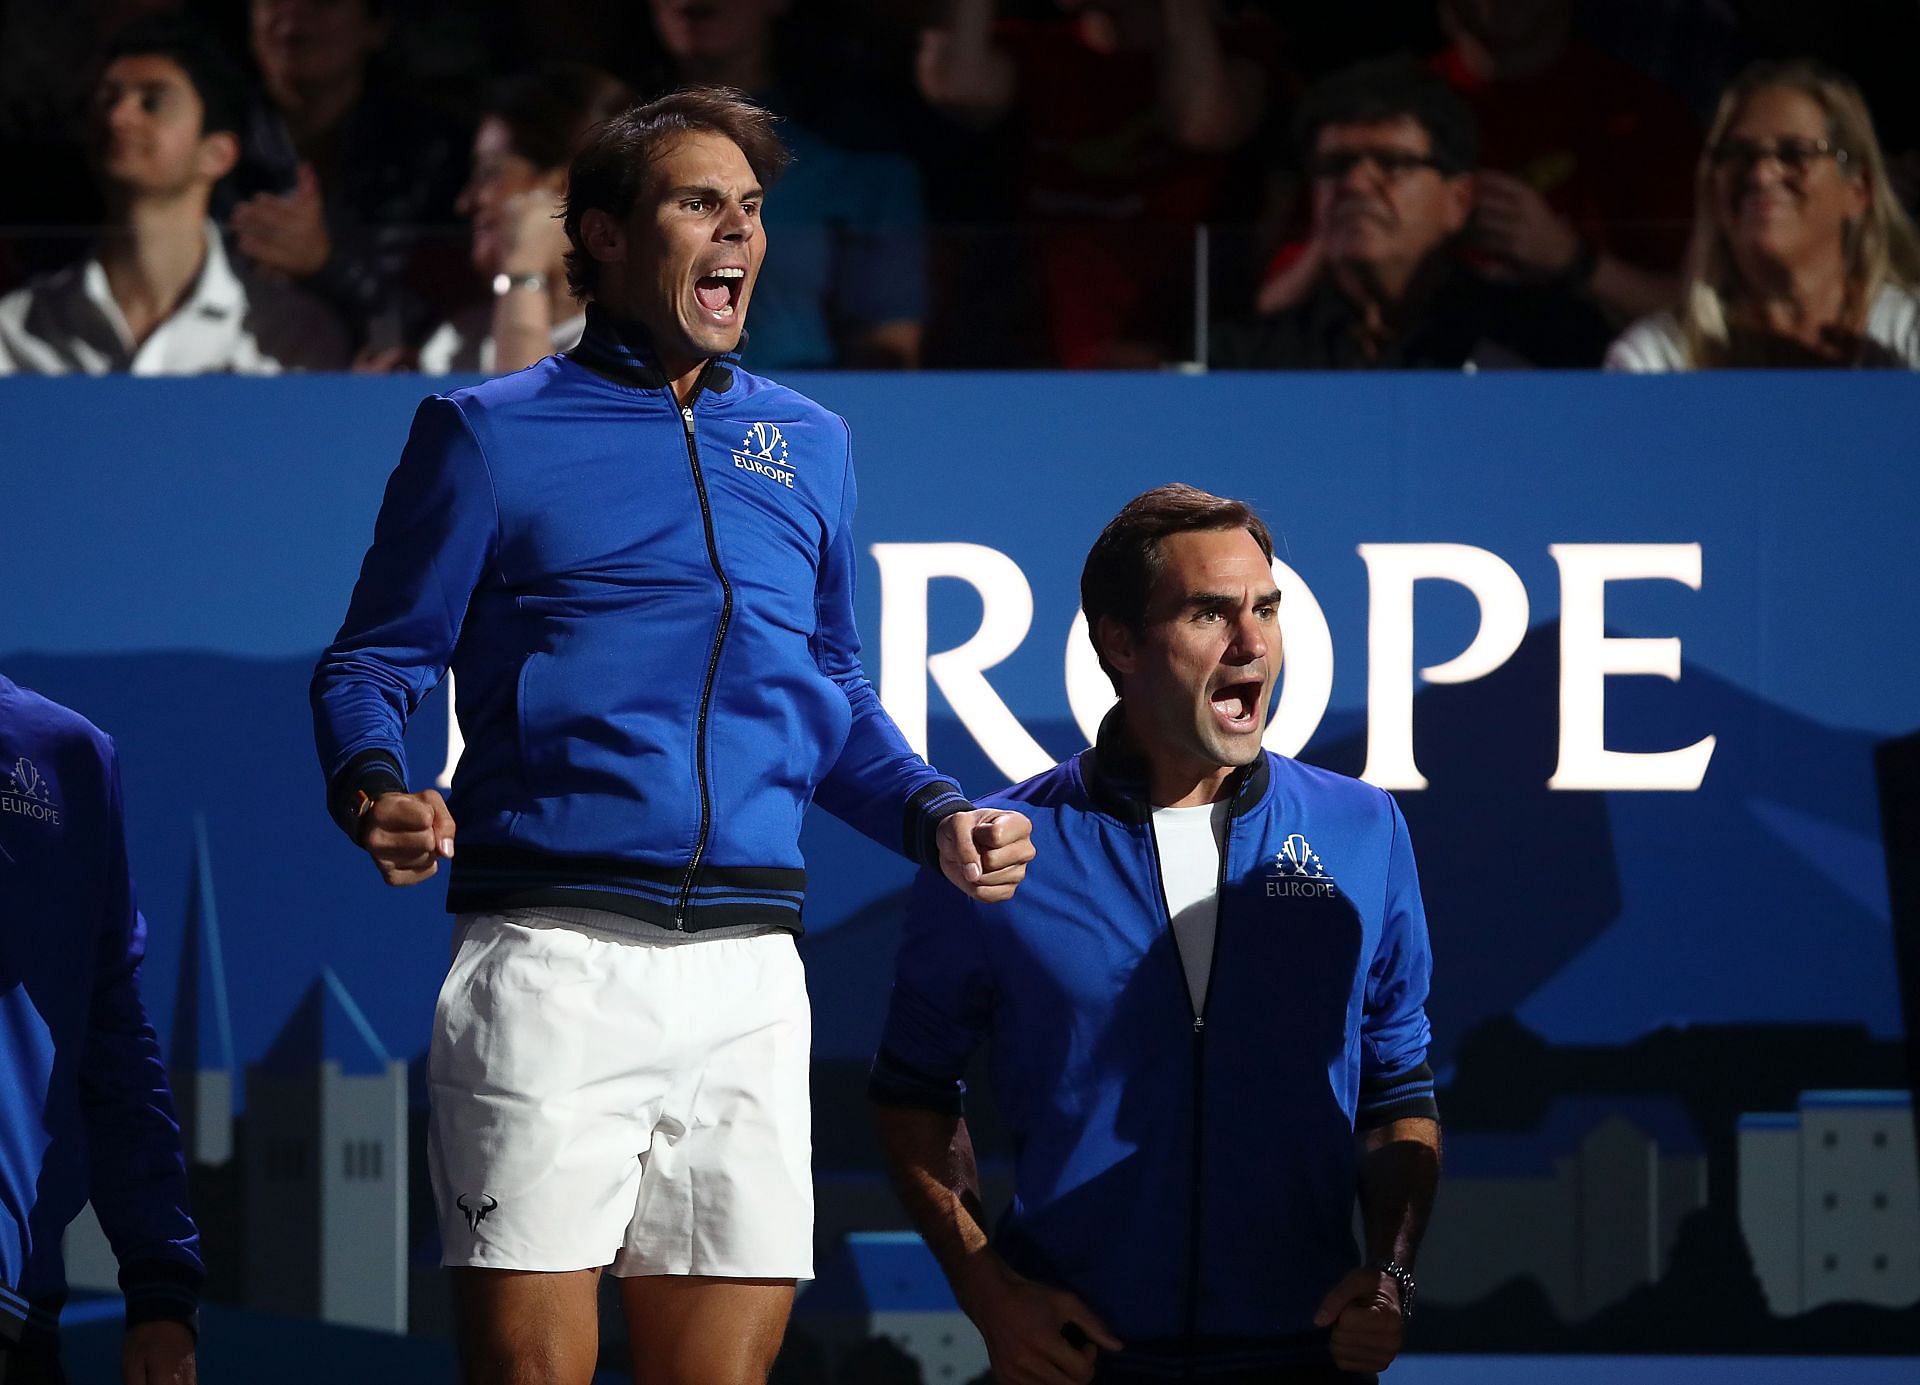 Roger Federer and Rafael Nadal at the Laver Cup 2019